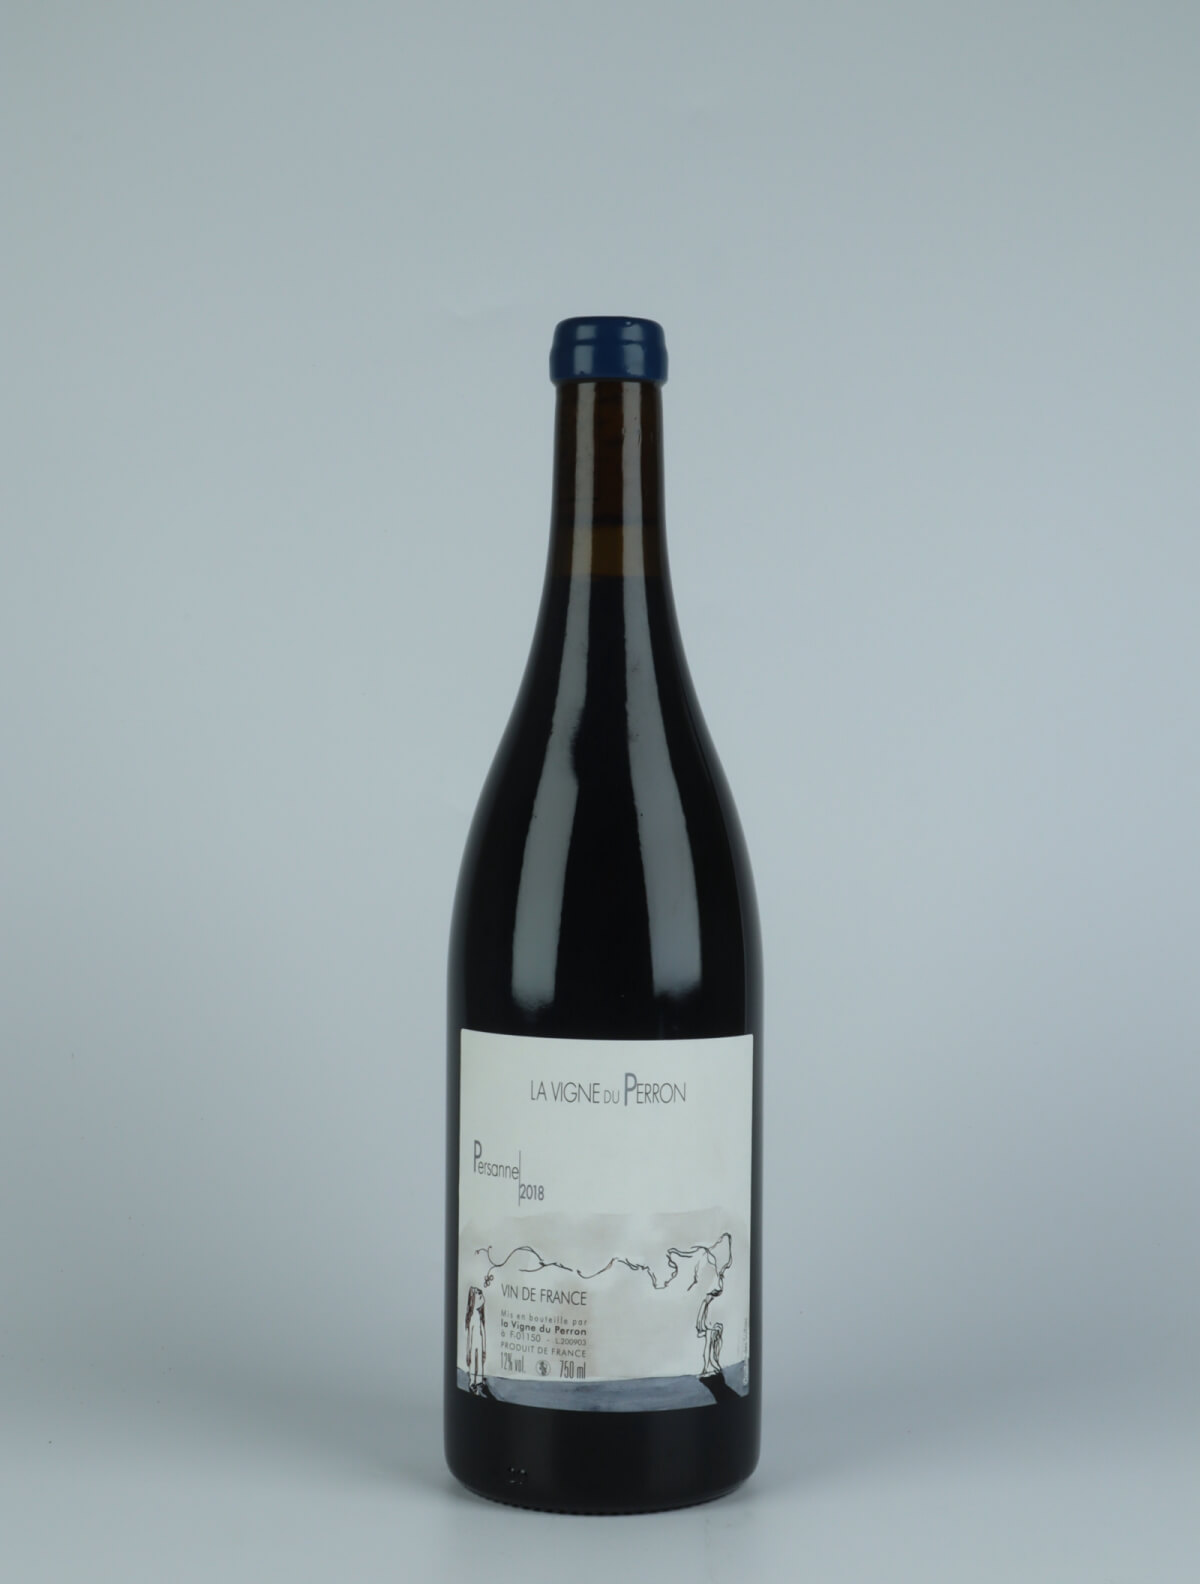 A bottle 2018 Persanne Red wine from Domaine du Perron, Bugey in France